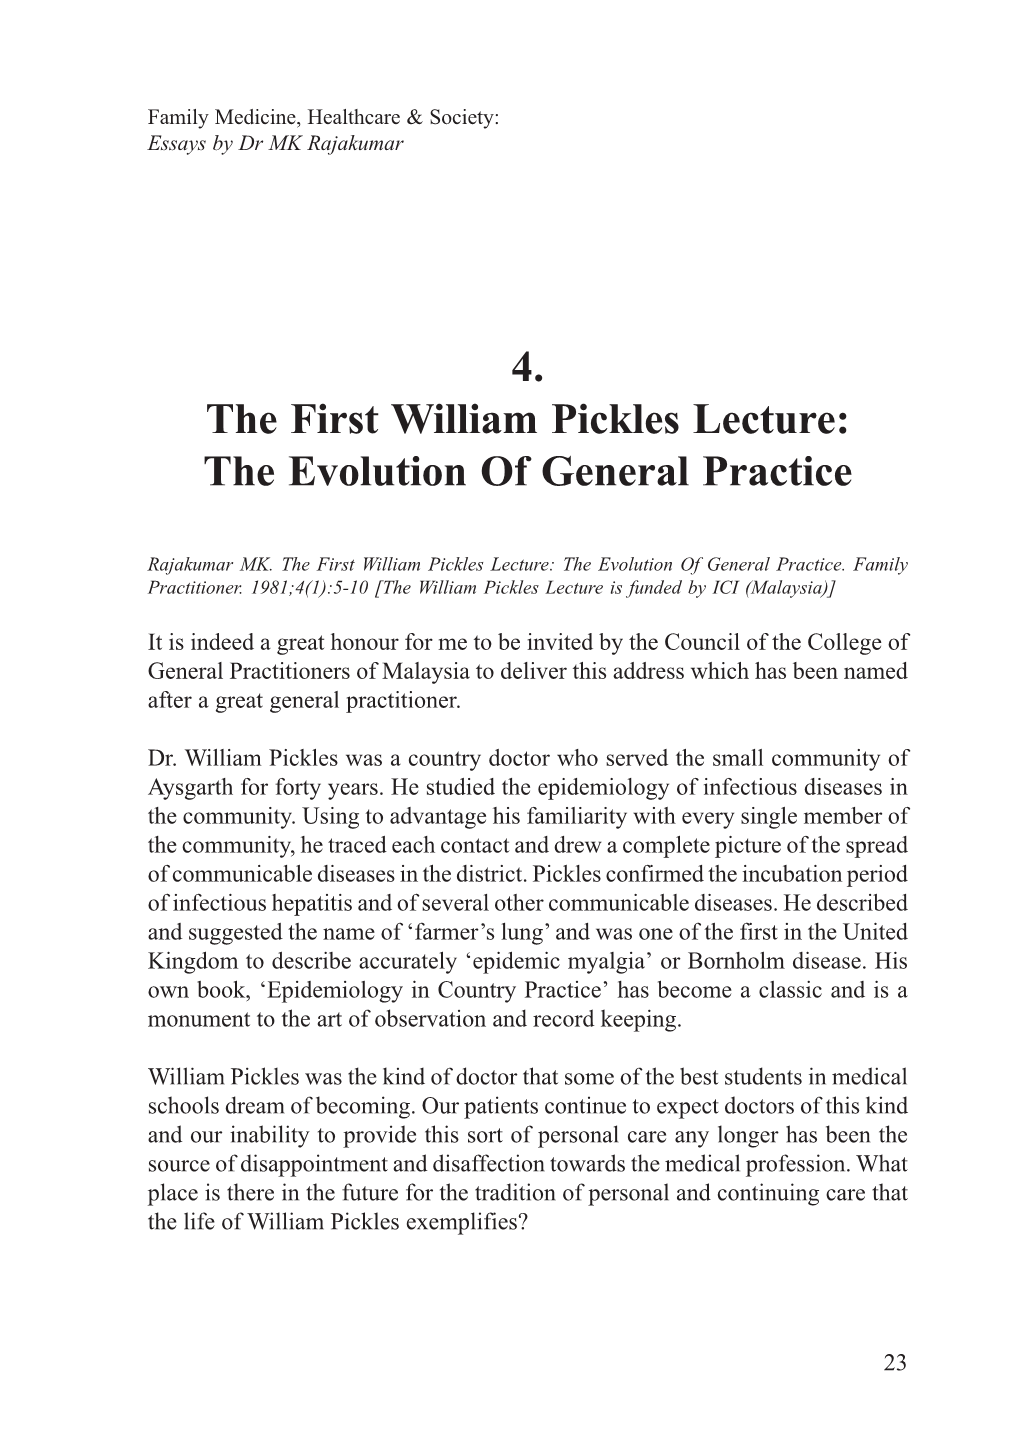 4. the First William Pickles Lecture: the Evolution of General Practice